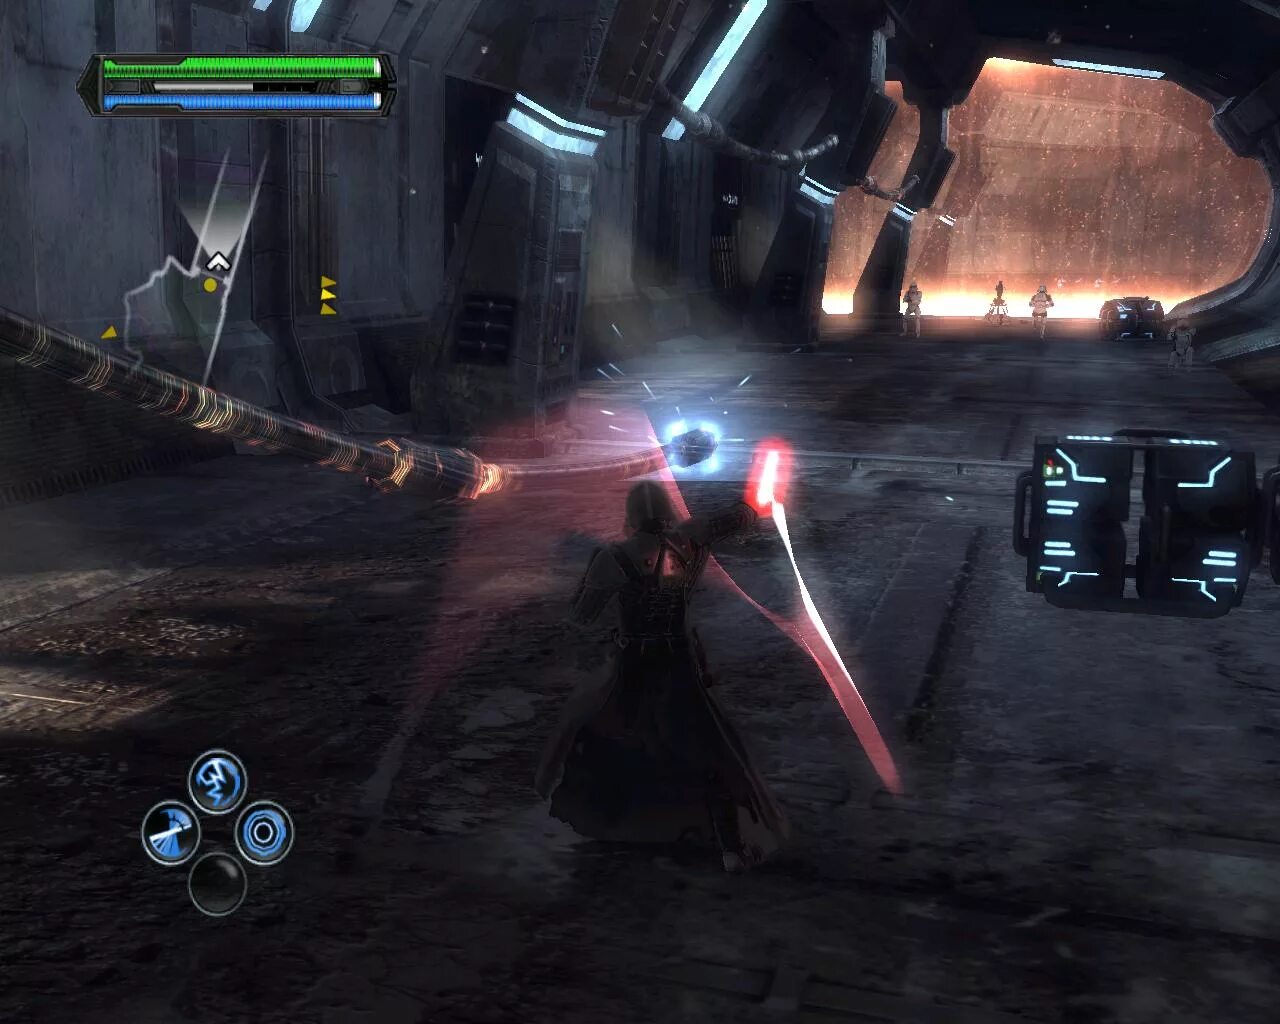 Коды star wars the force unleashed 2. Star Wars the Force unleashed II костюмы. Звёздные войны the Force unleashed 3. The Force unleashed 2 костюмы. Star Wars the Force unleashed 2 костюмы.